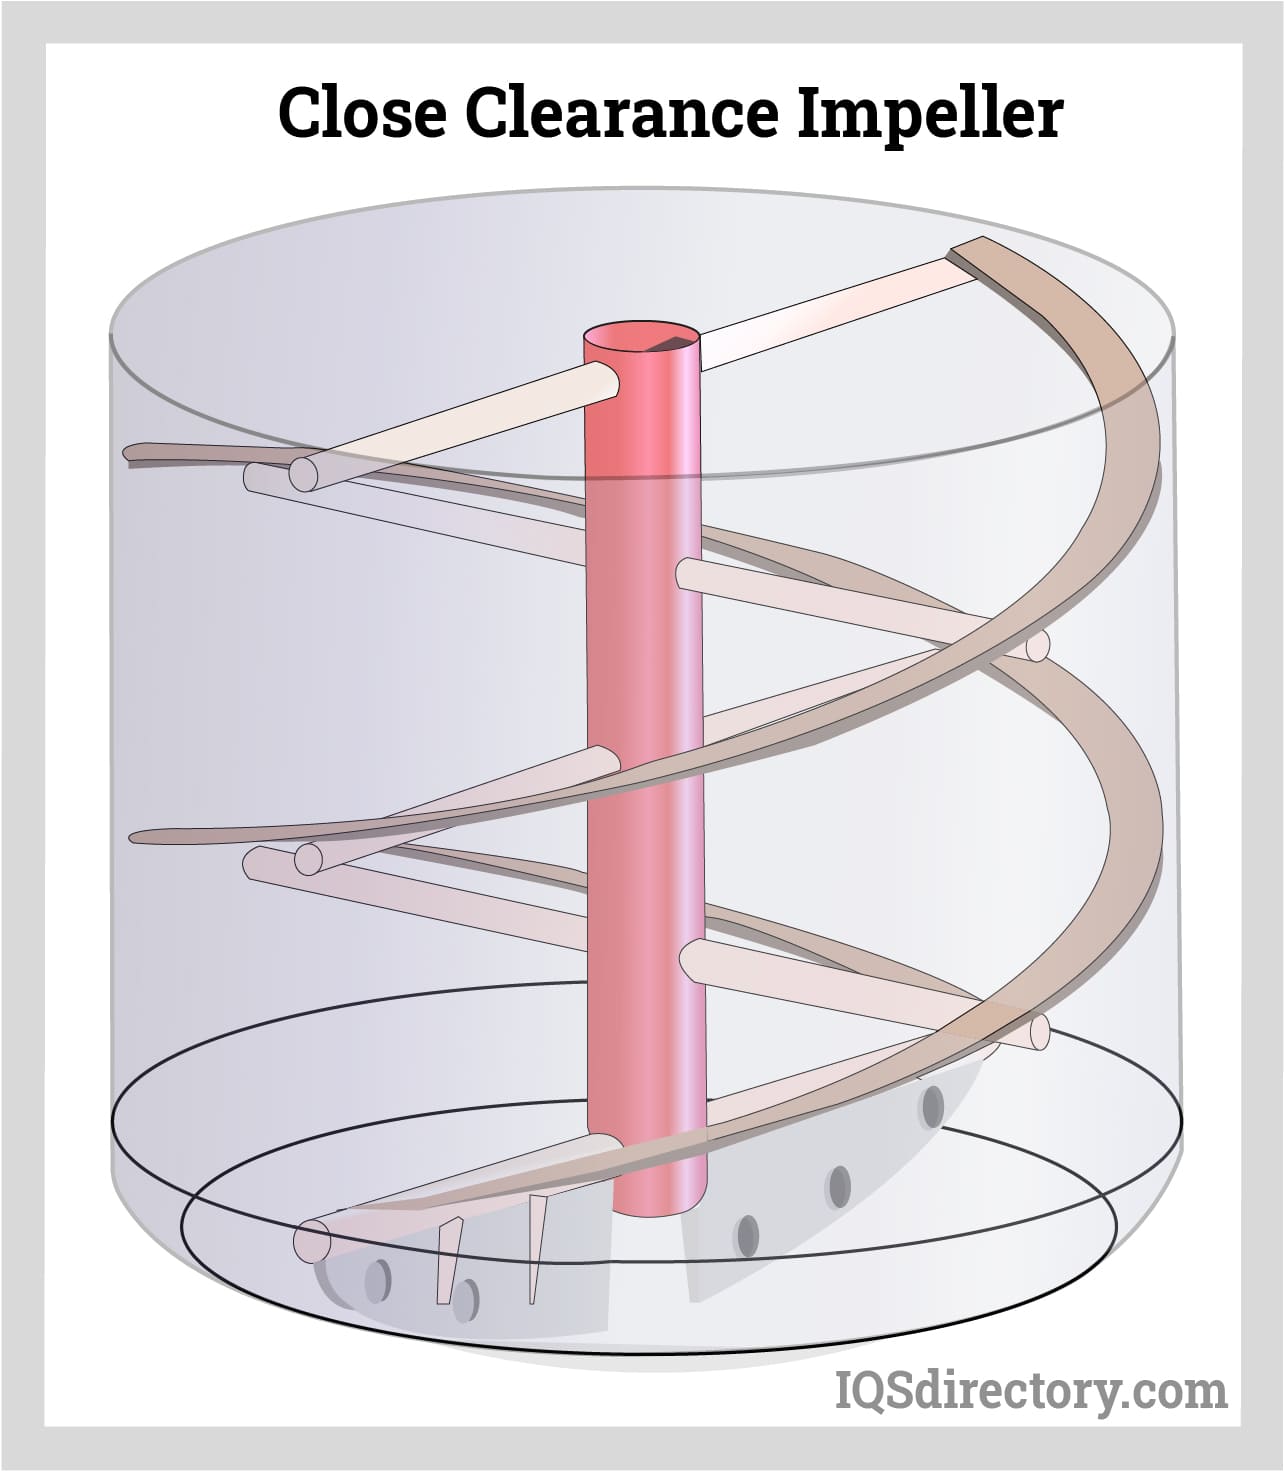 Close Clearance Impeller